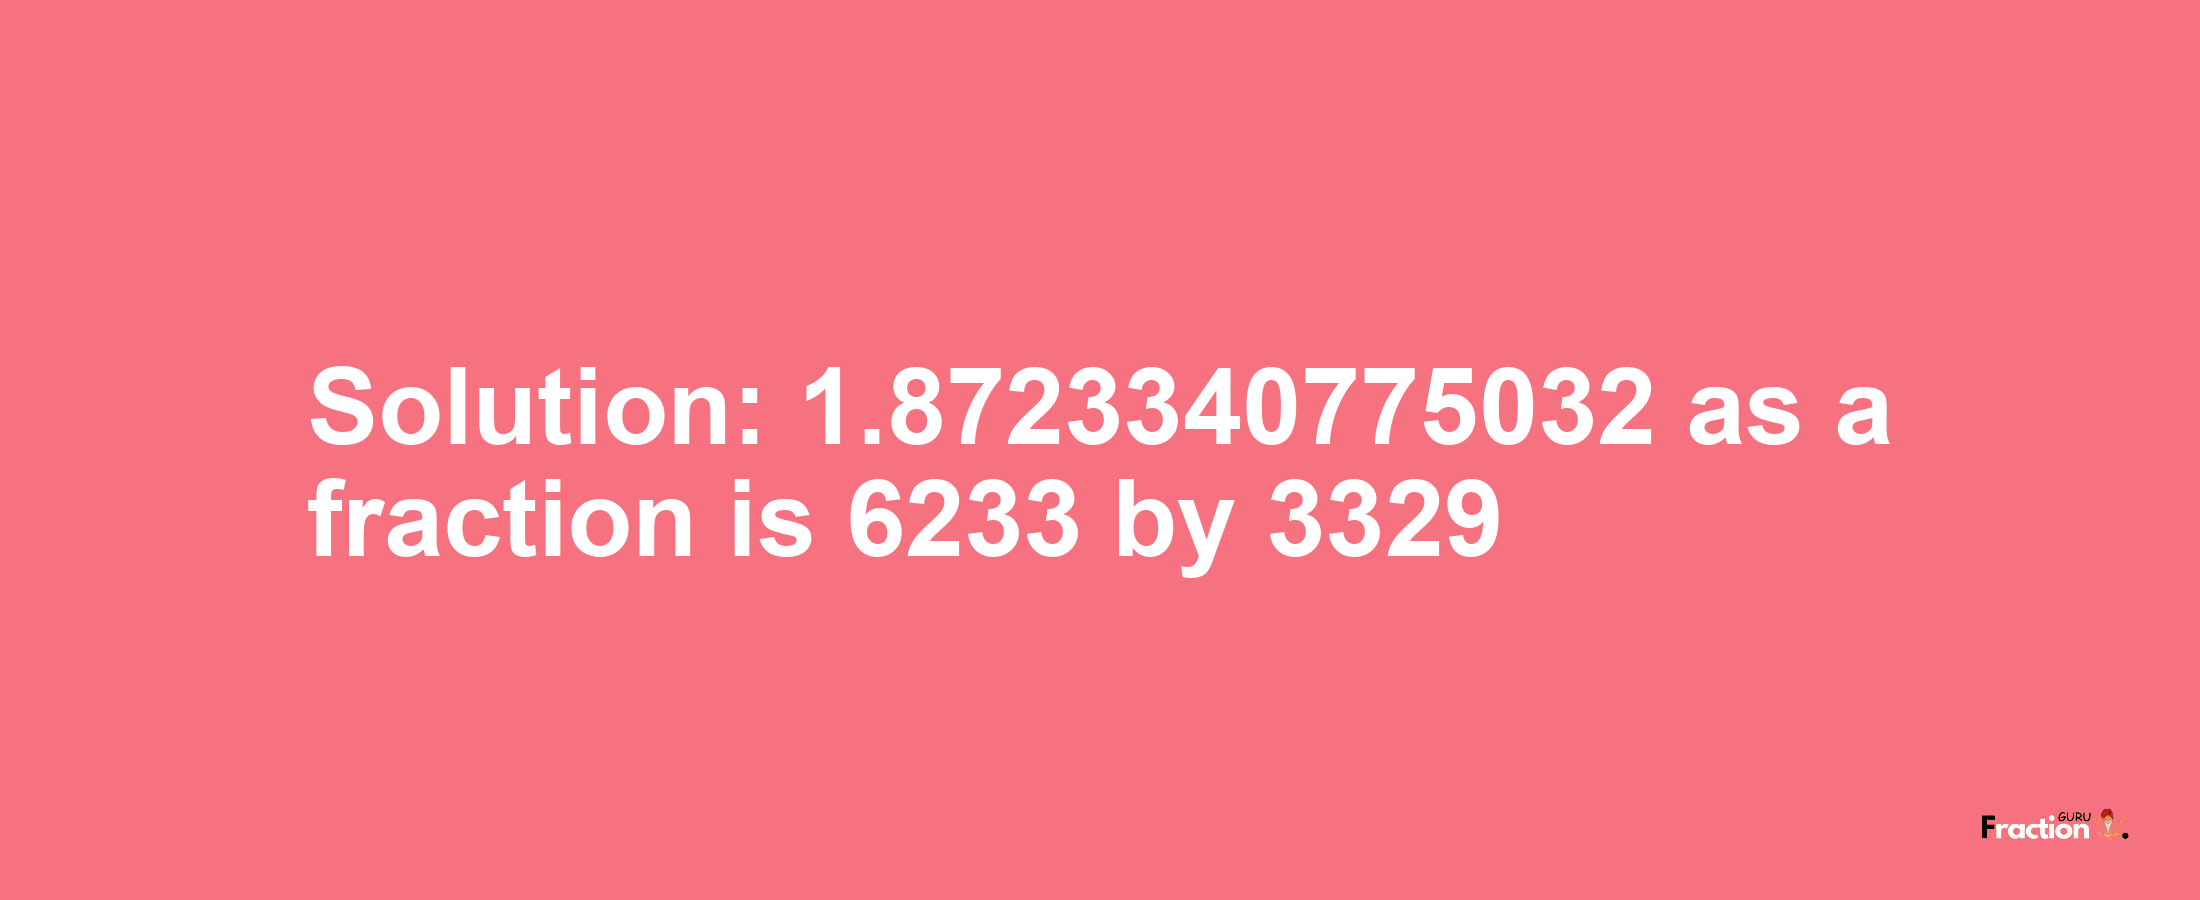 Solution:1.8723340775032 as a fraction is 6233/3329